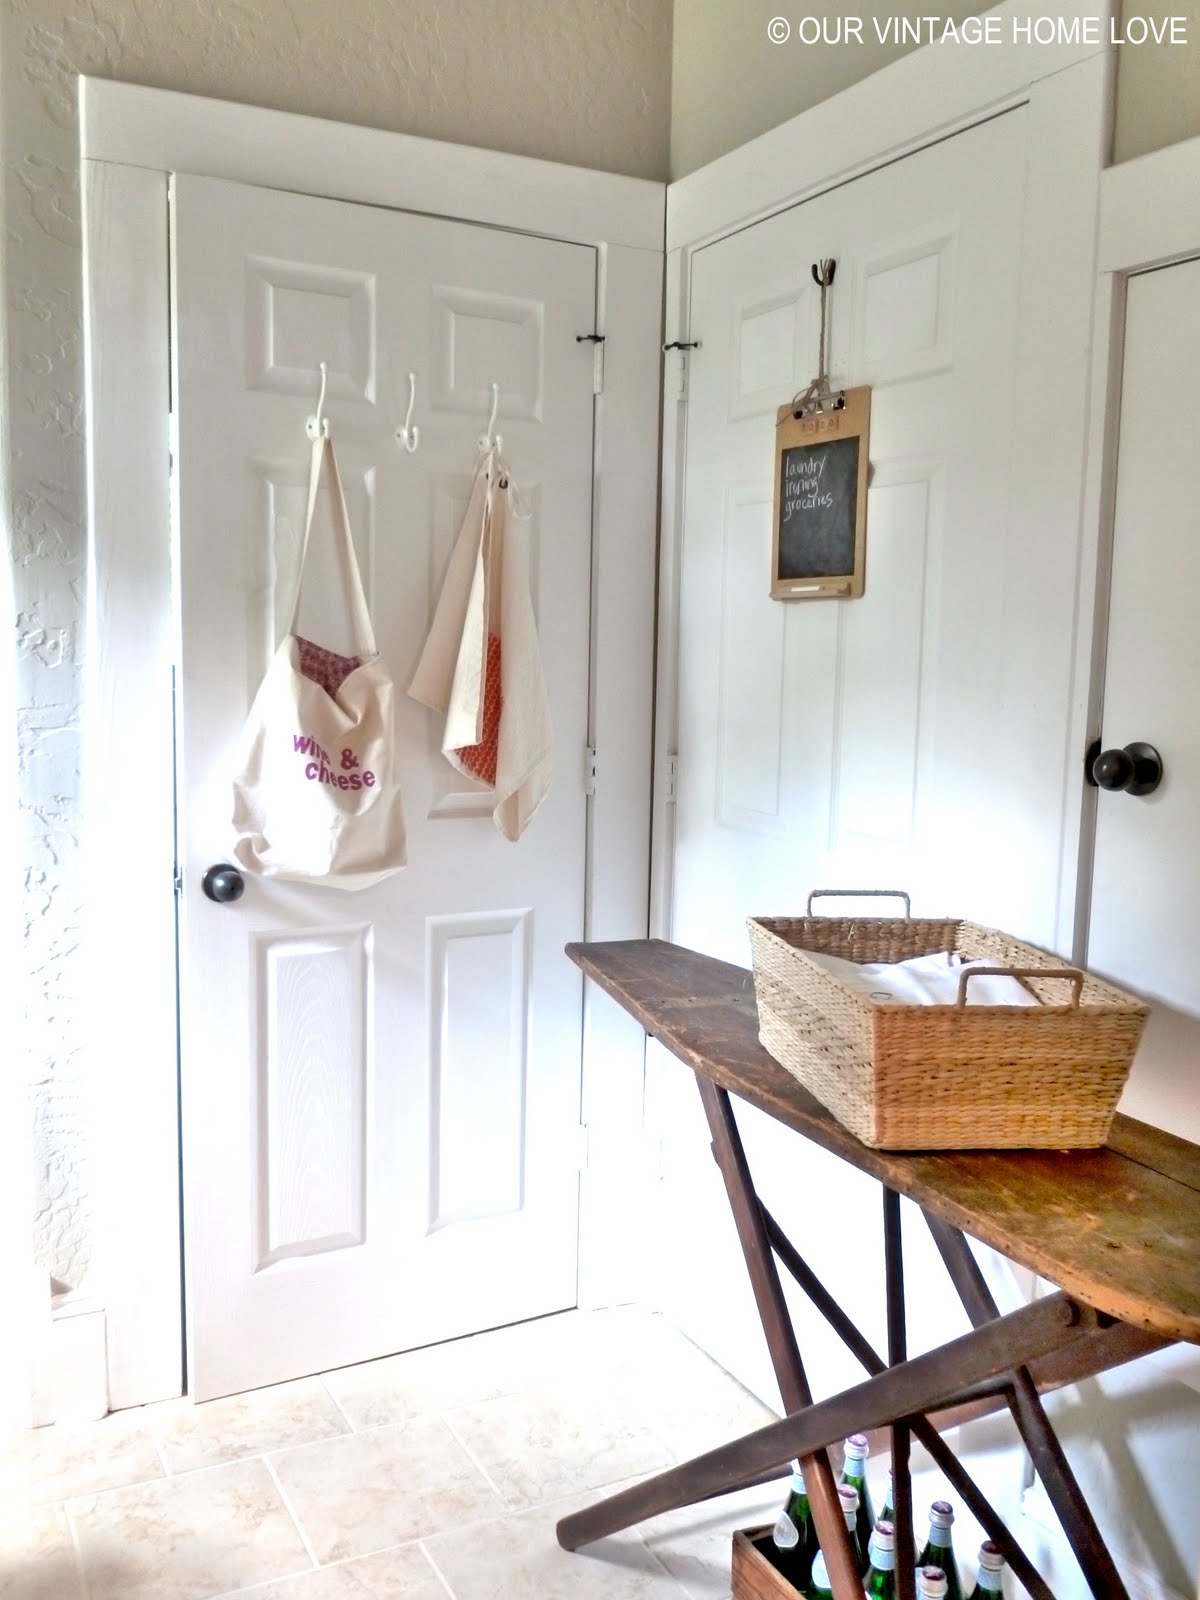 vintage home love: Laundry Room Ideas and a Vintage 